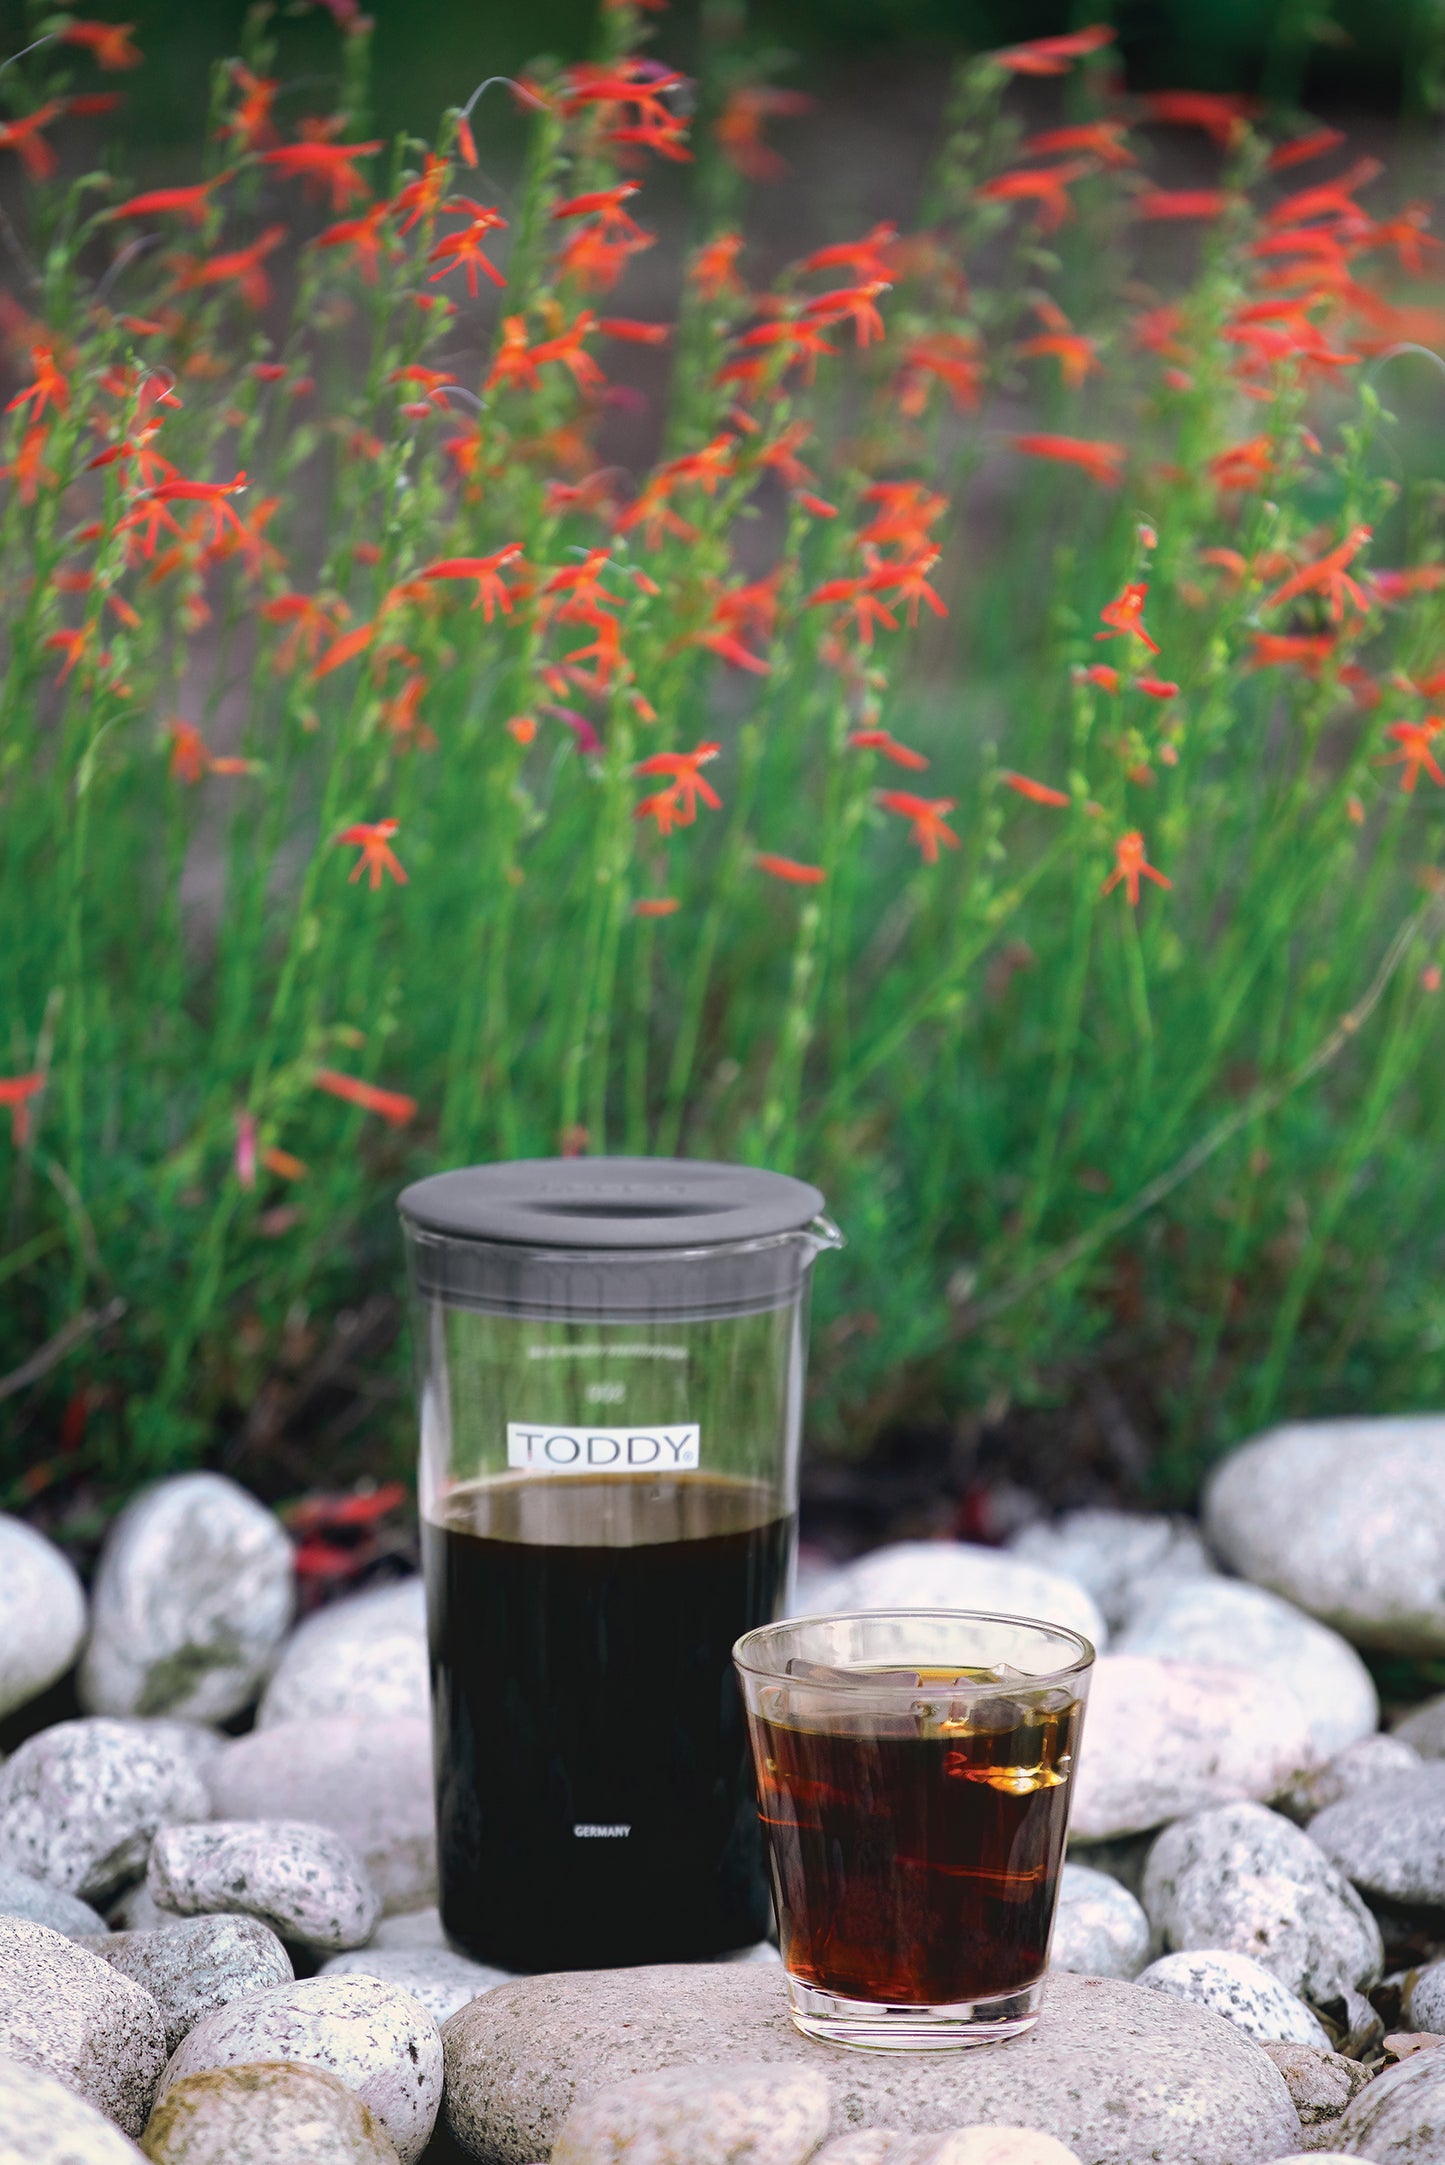 Toddy®

small batch cold brew system